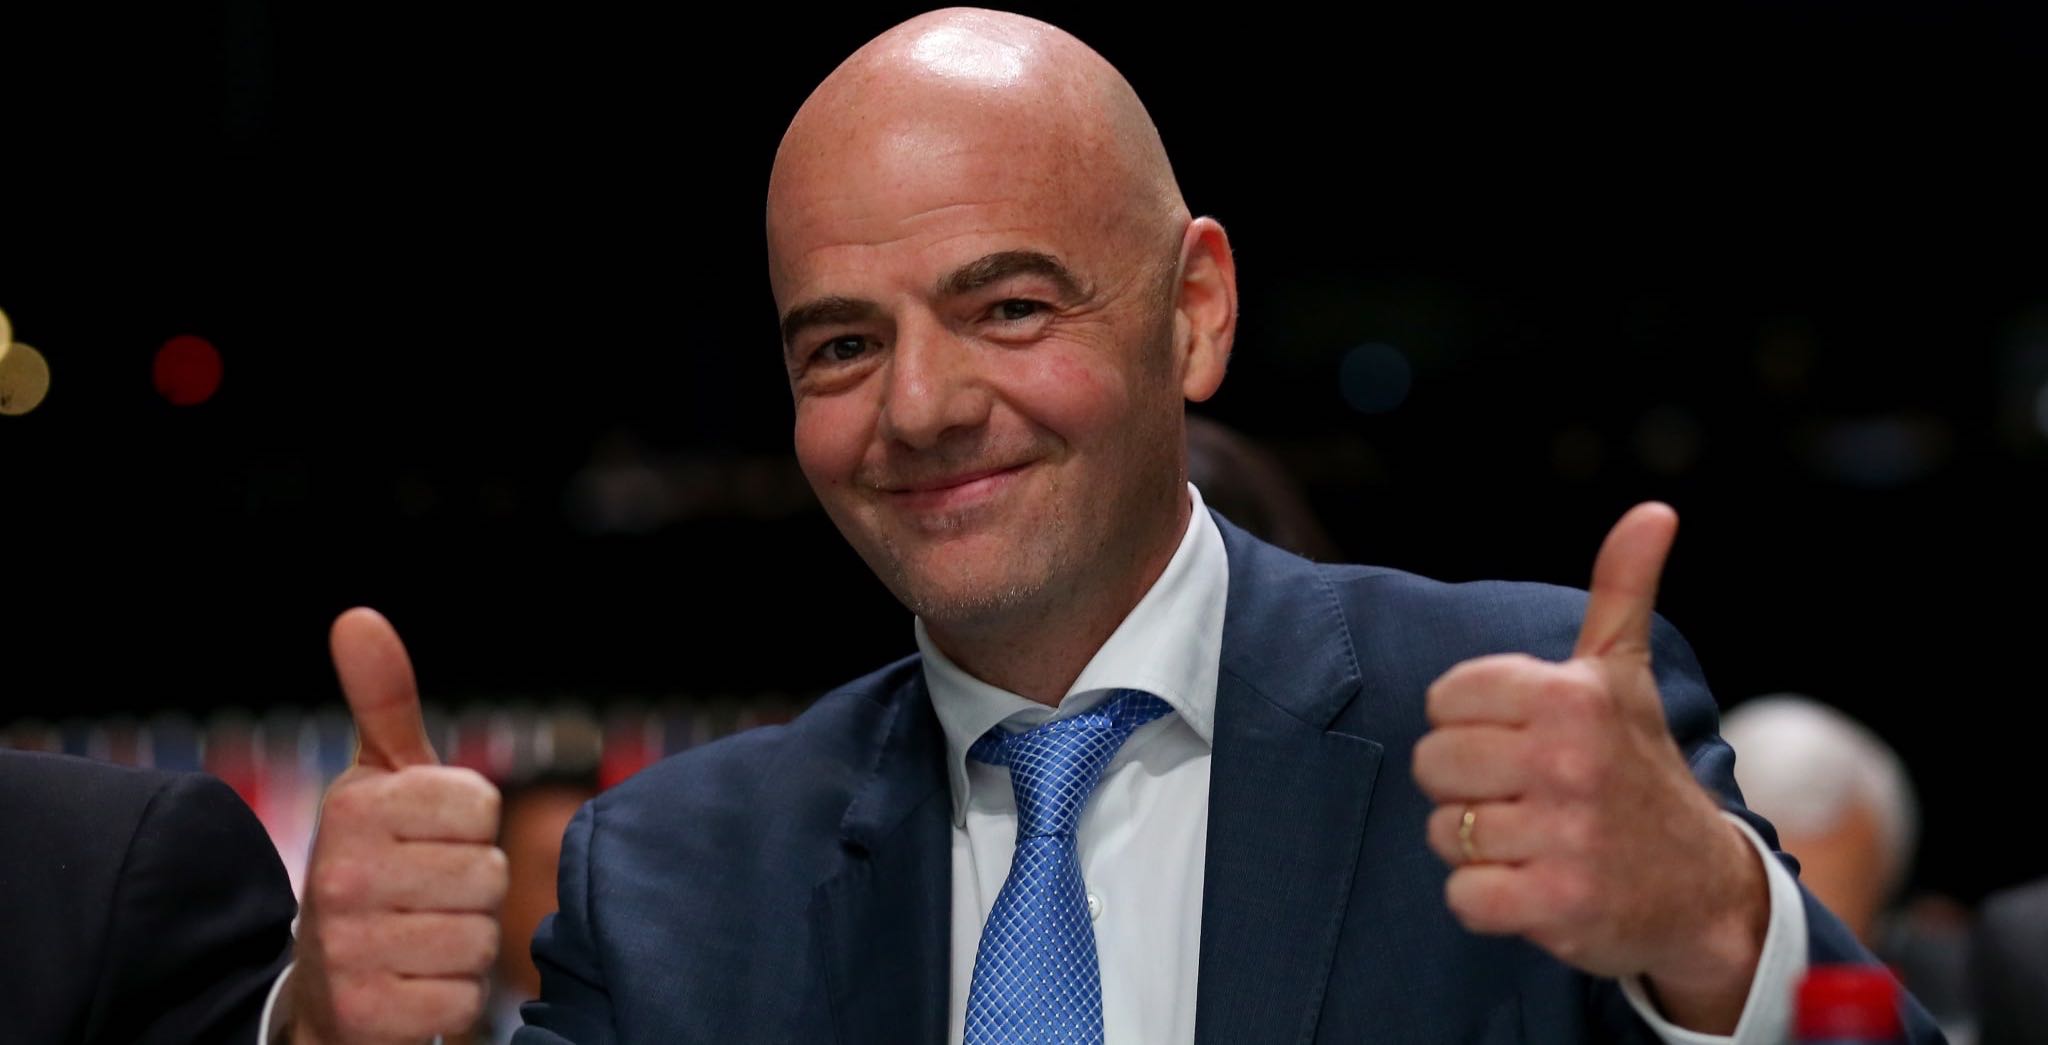 Infantino: We kicked corruption out of football.